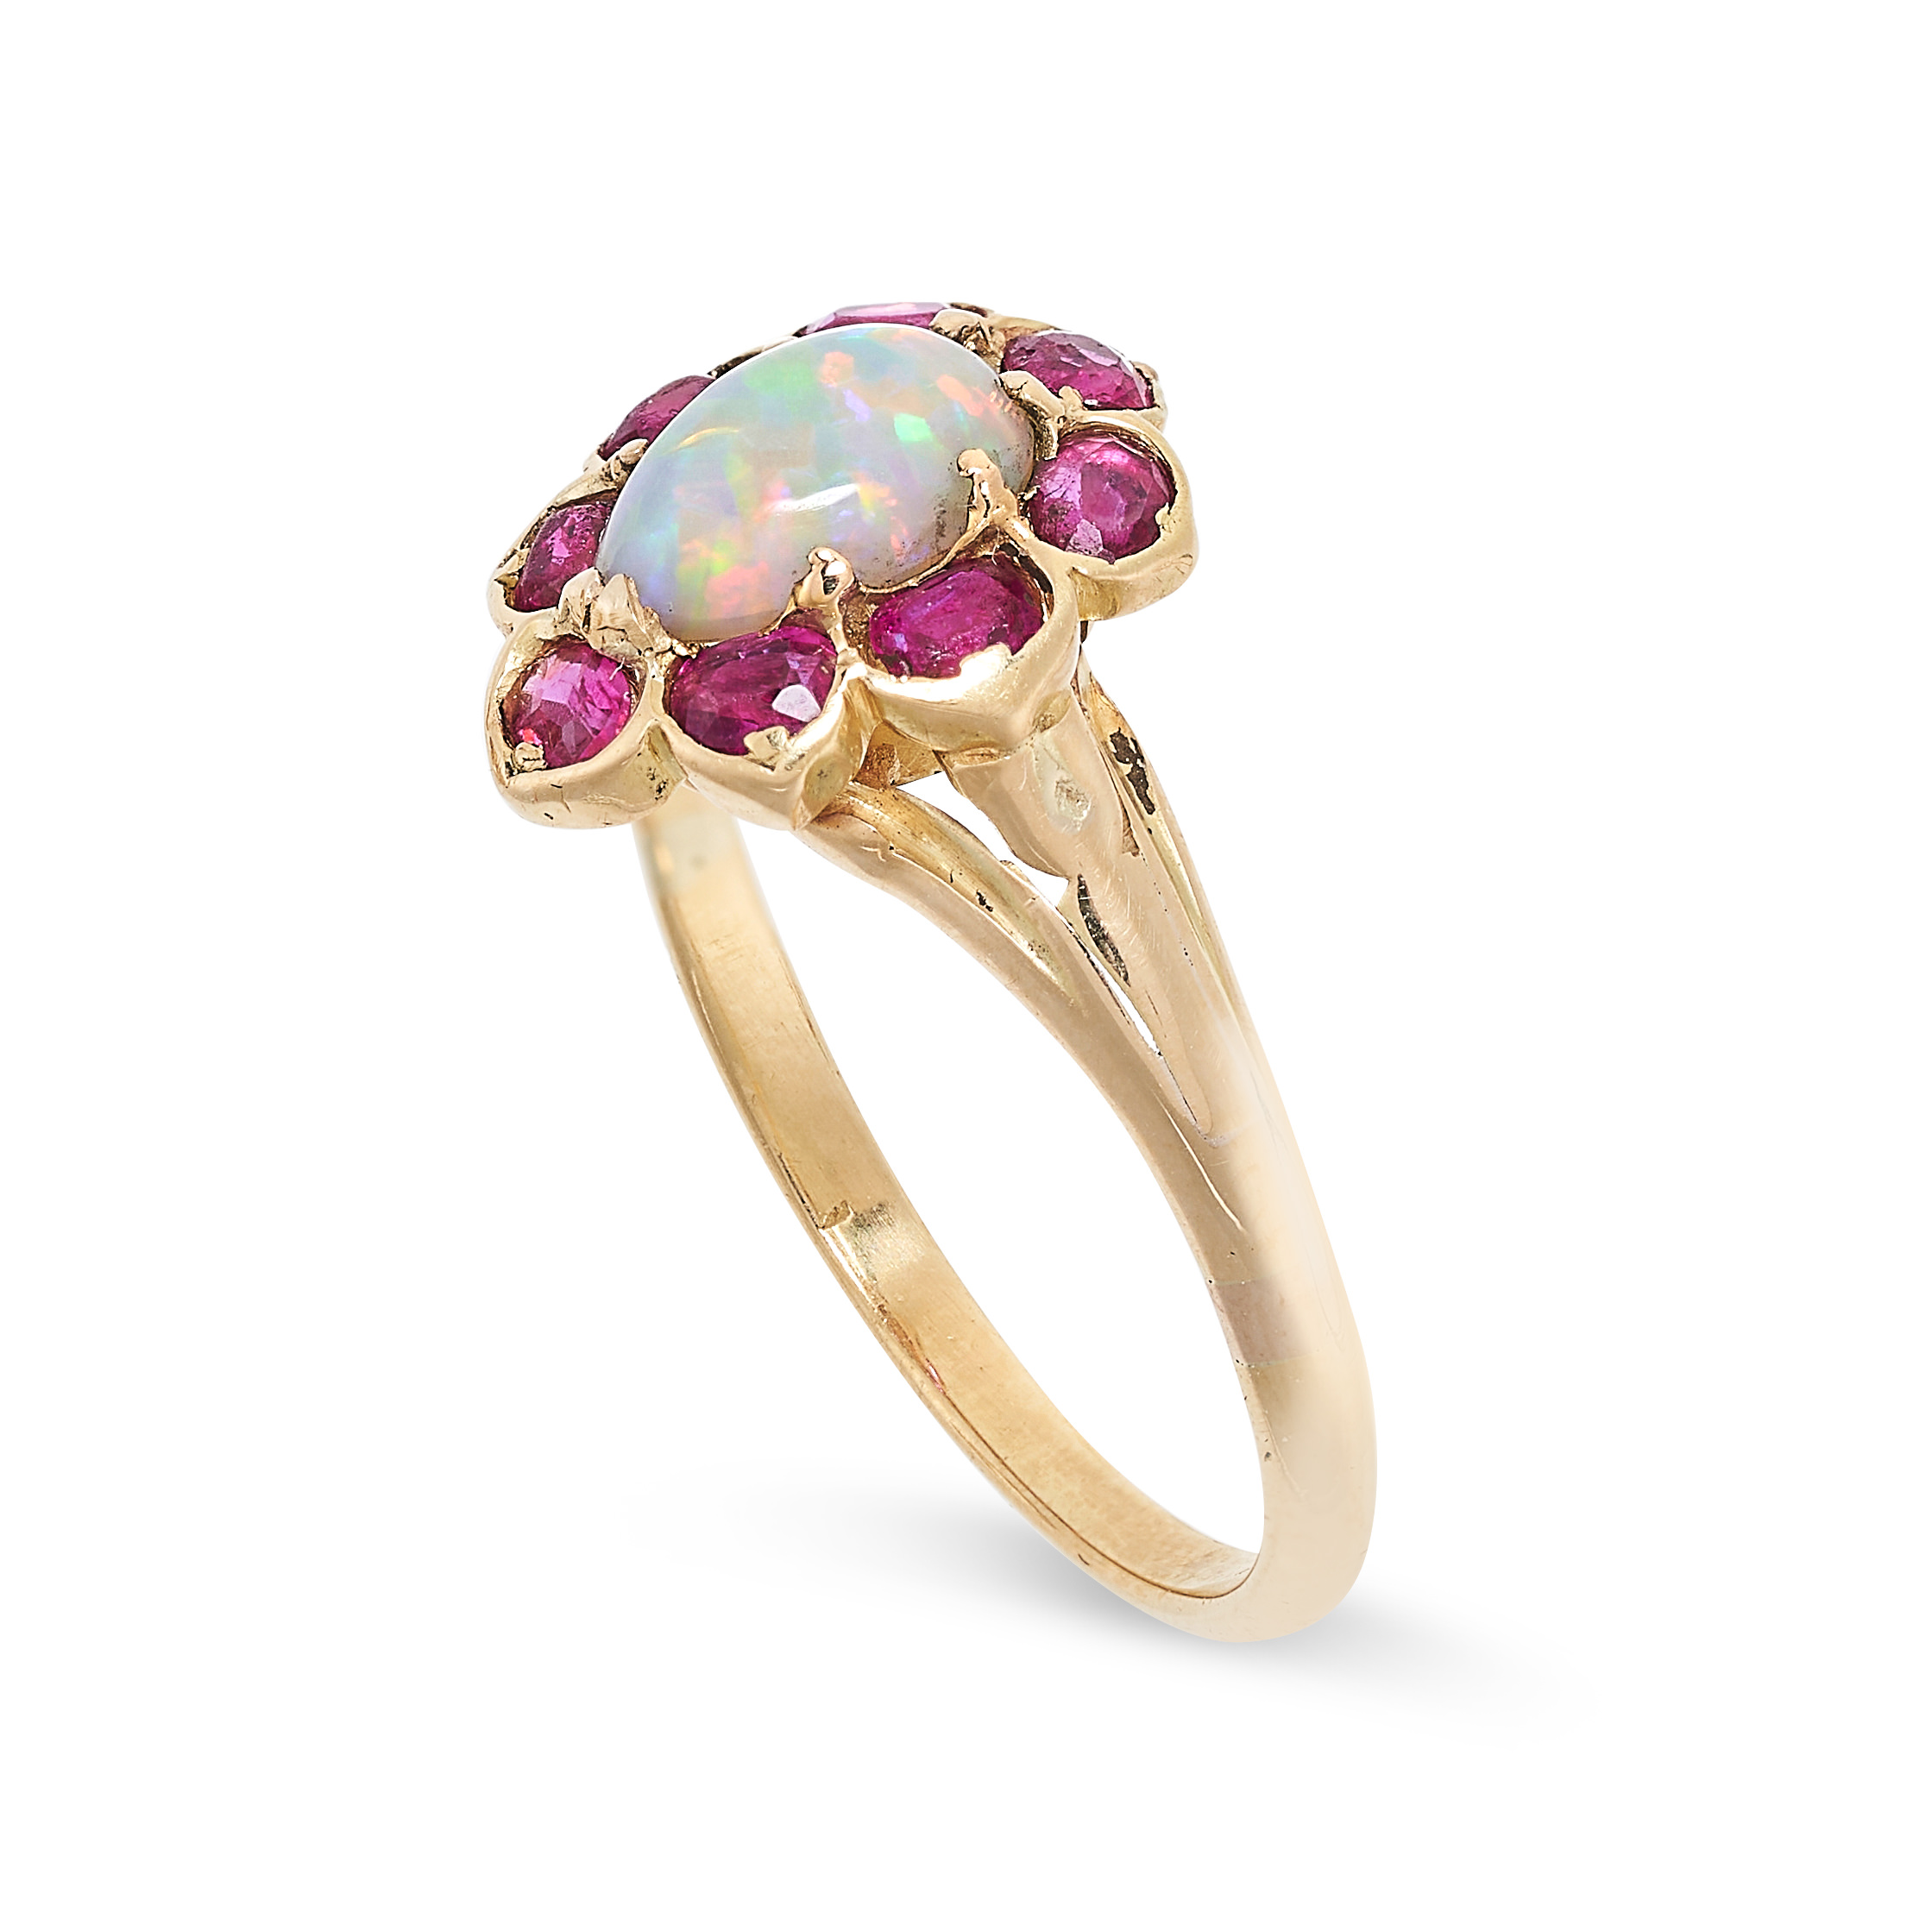 AN ANTIQUE OPAL AND RUBY RING in yellow gold, set with a pear shaped cabochon opal within a border - Image 2 of 2